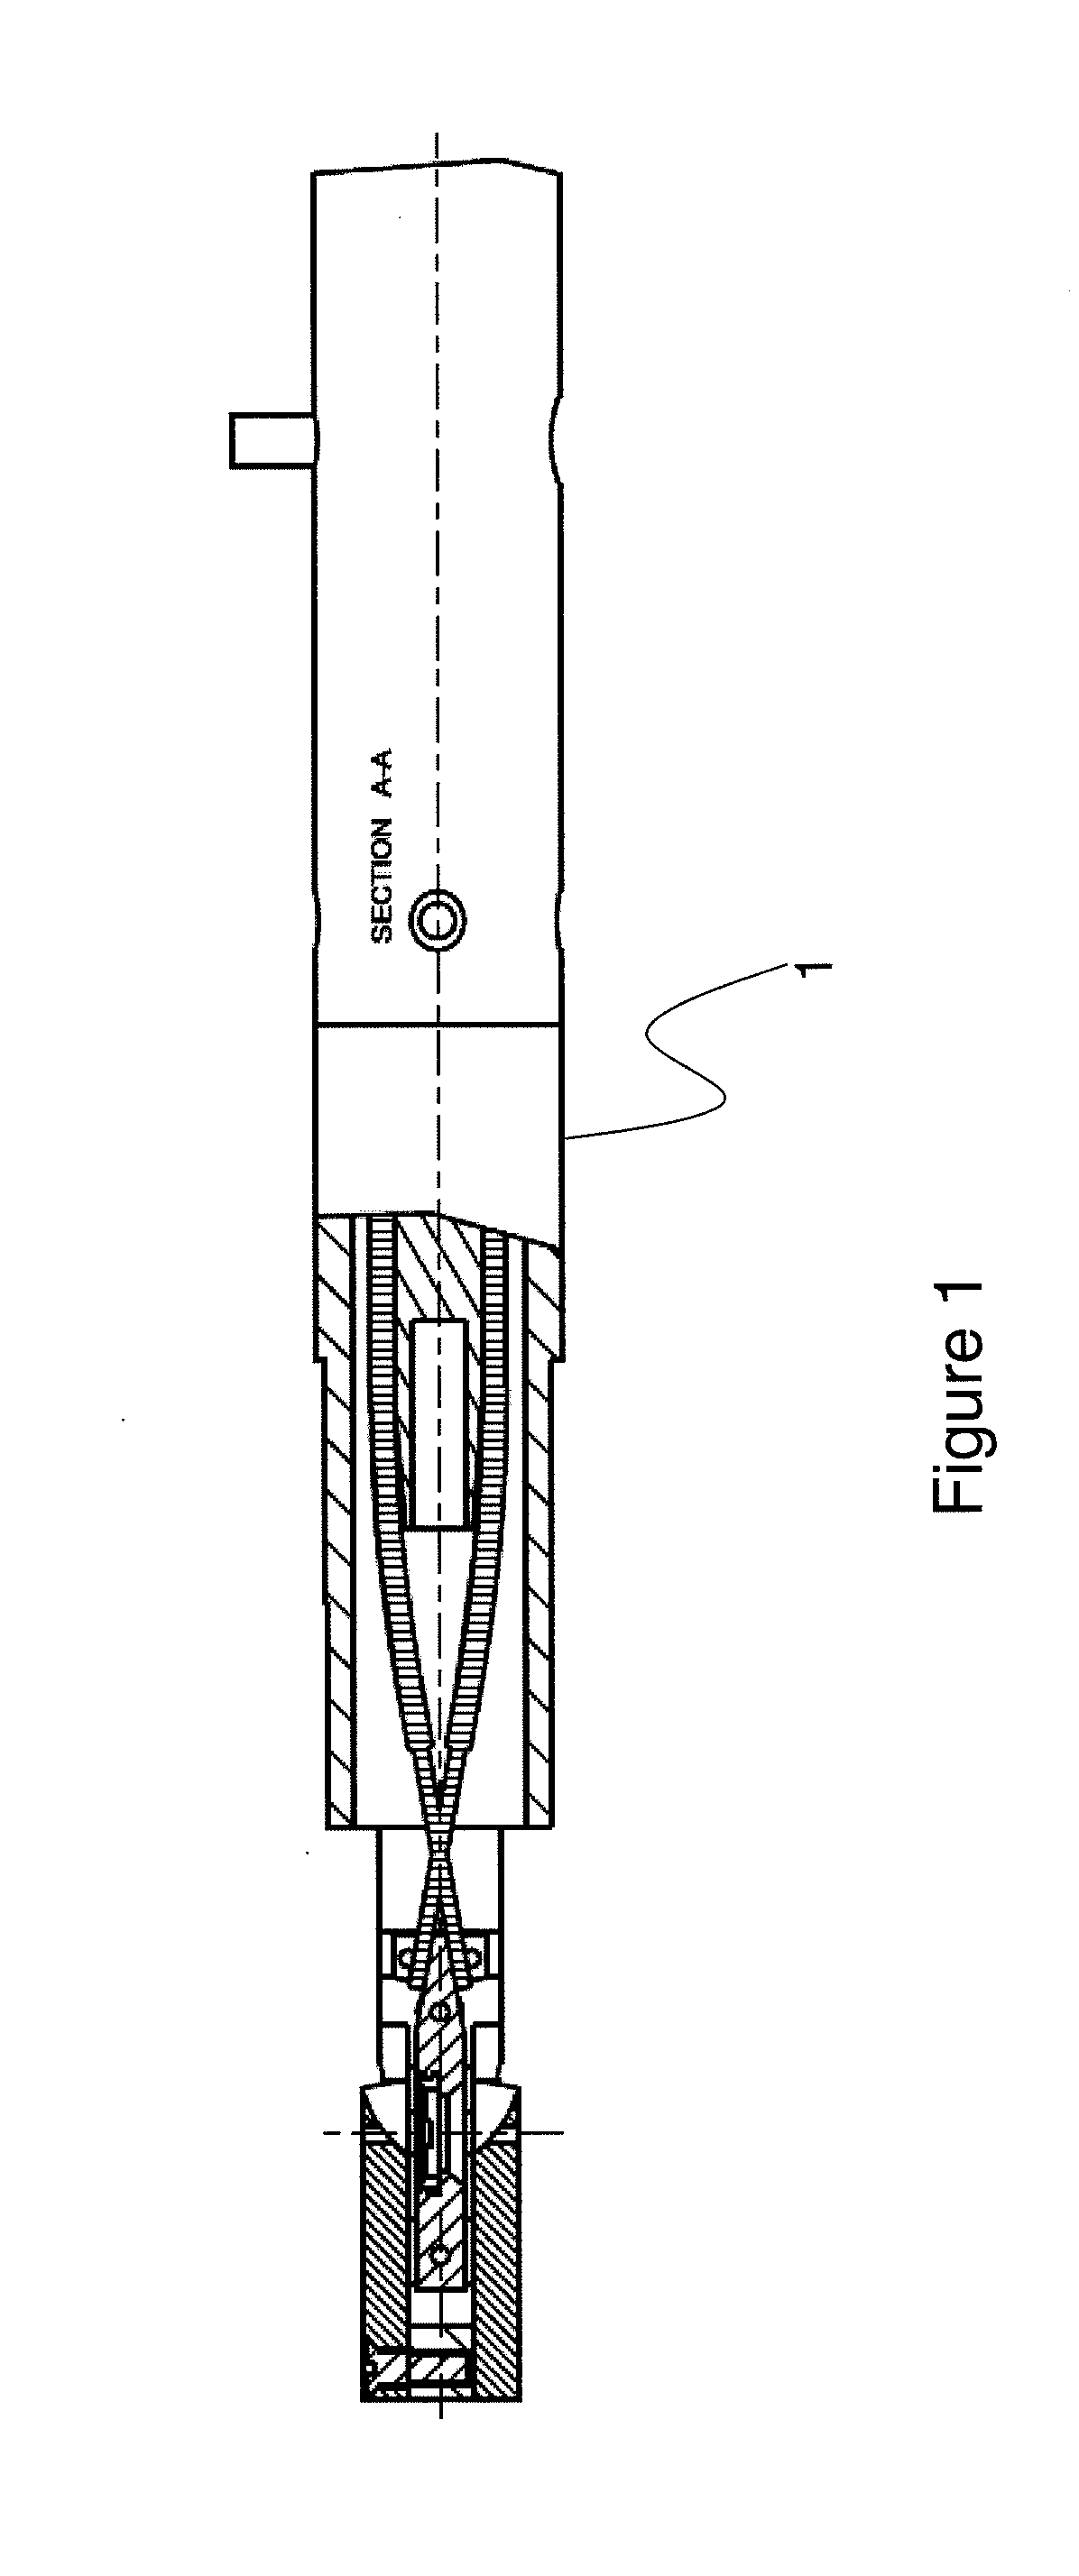 Apparatus for collection of cathodoluminescence signals